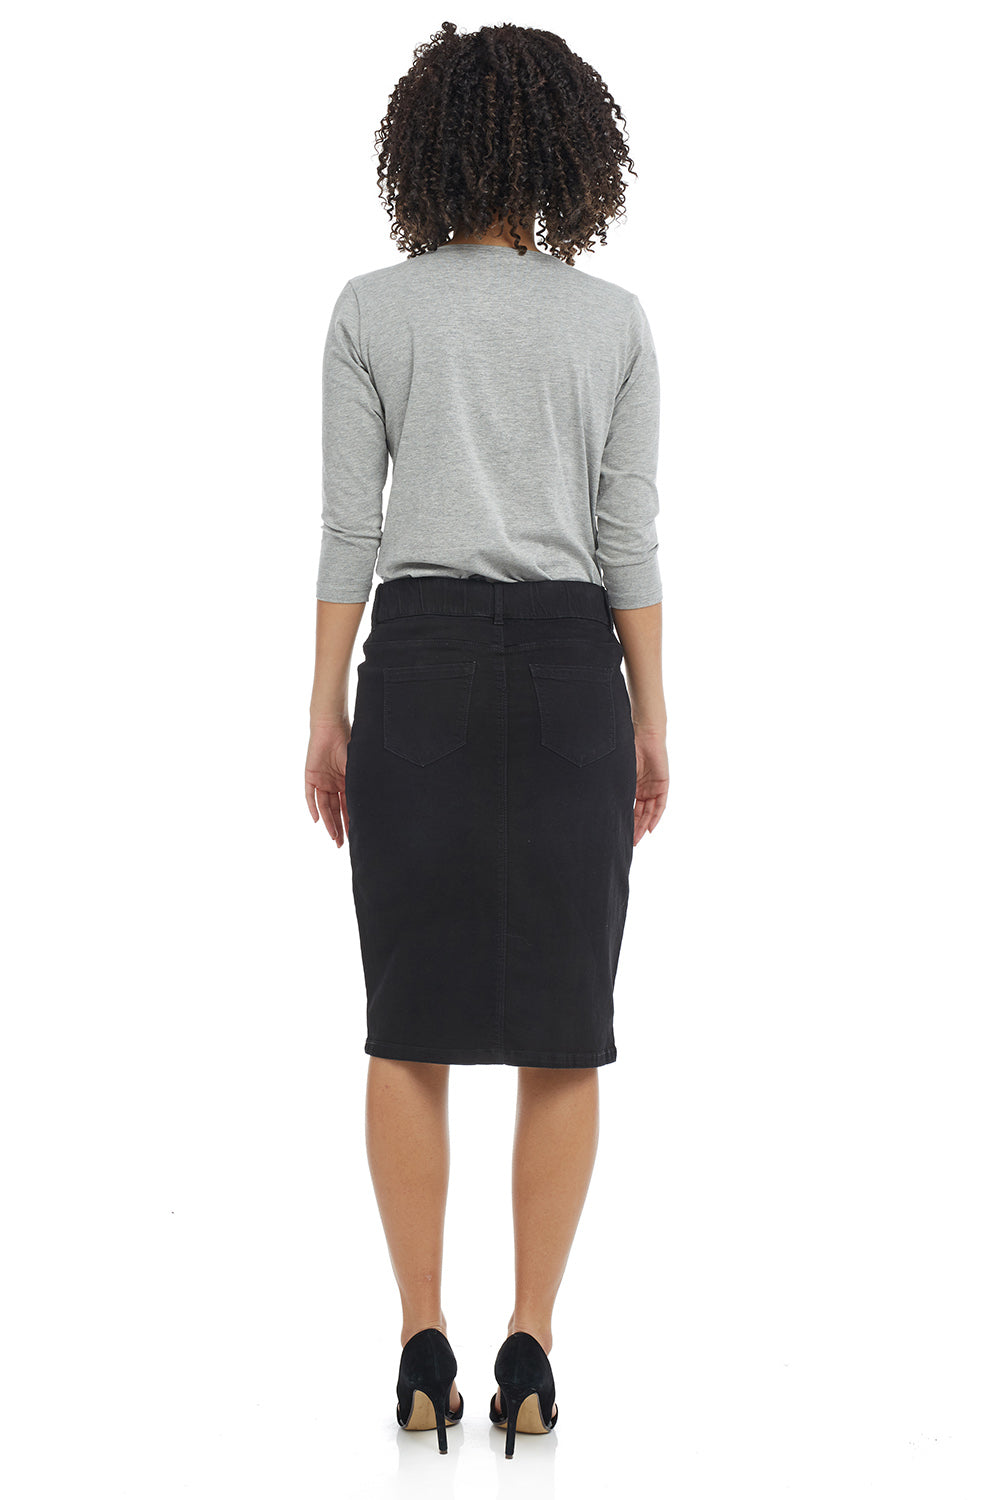 modest black straight denim jean skirt for women with pockets and belt loops